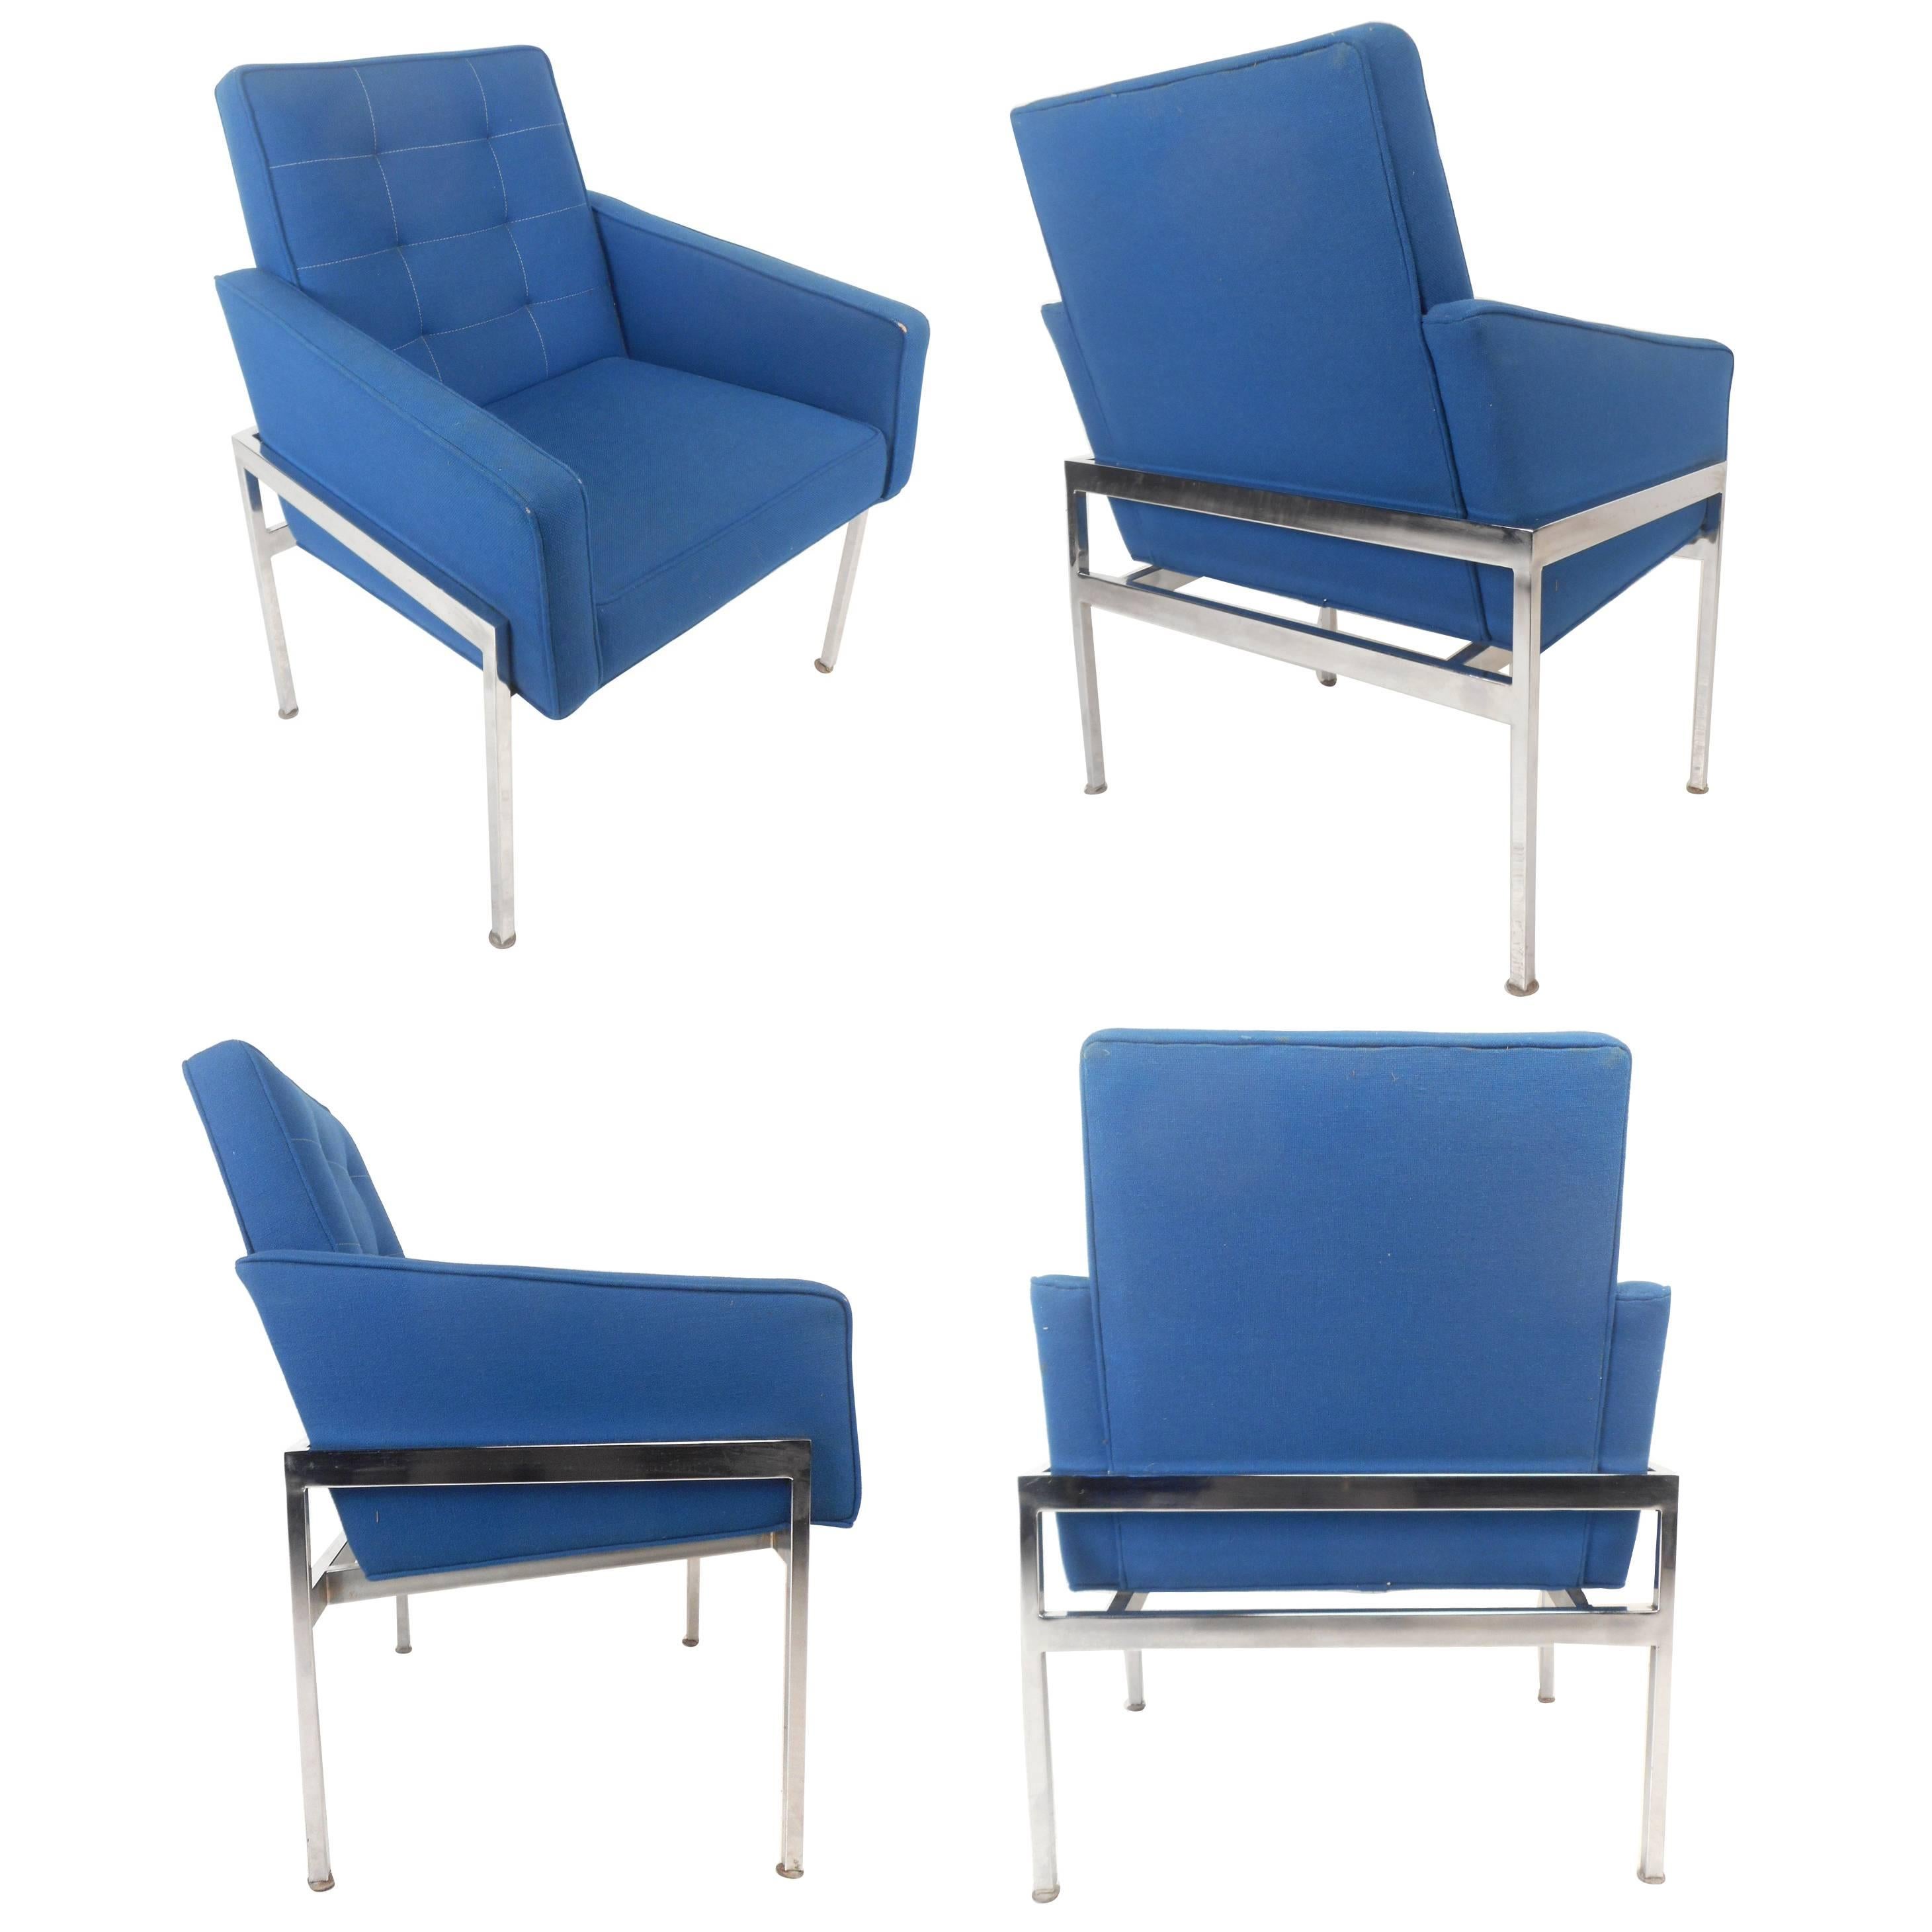 Pair of Mid-Century Modern Chrome Frame Tufted Lounge Chairs